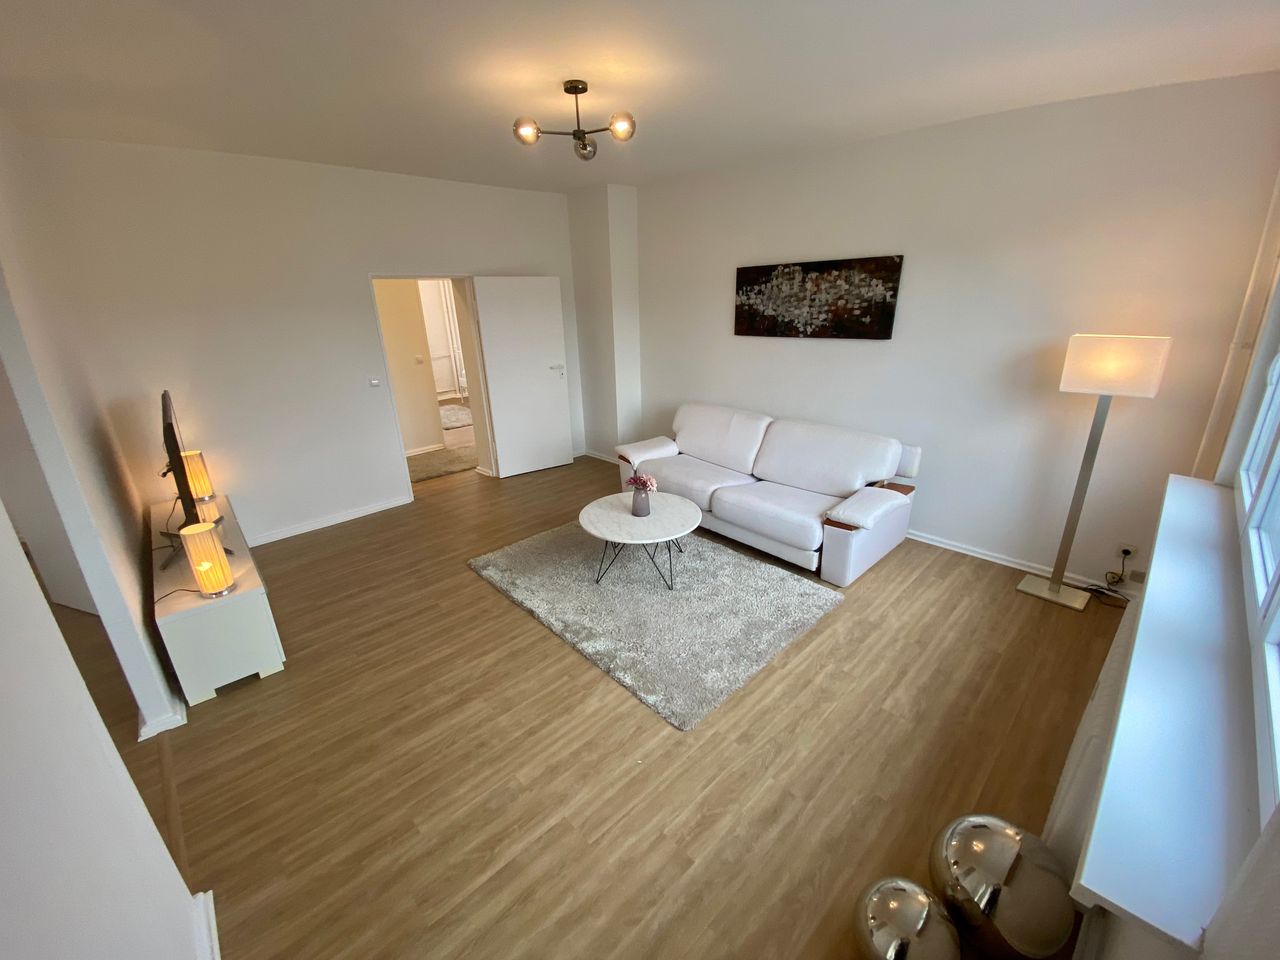 Modern Fully furnished 3 room apartment at Kudamm / Olivaer Platz, 3rd floor, balcony wih park view